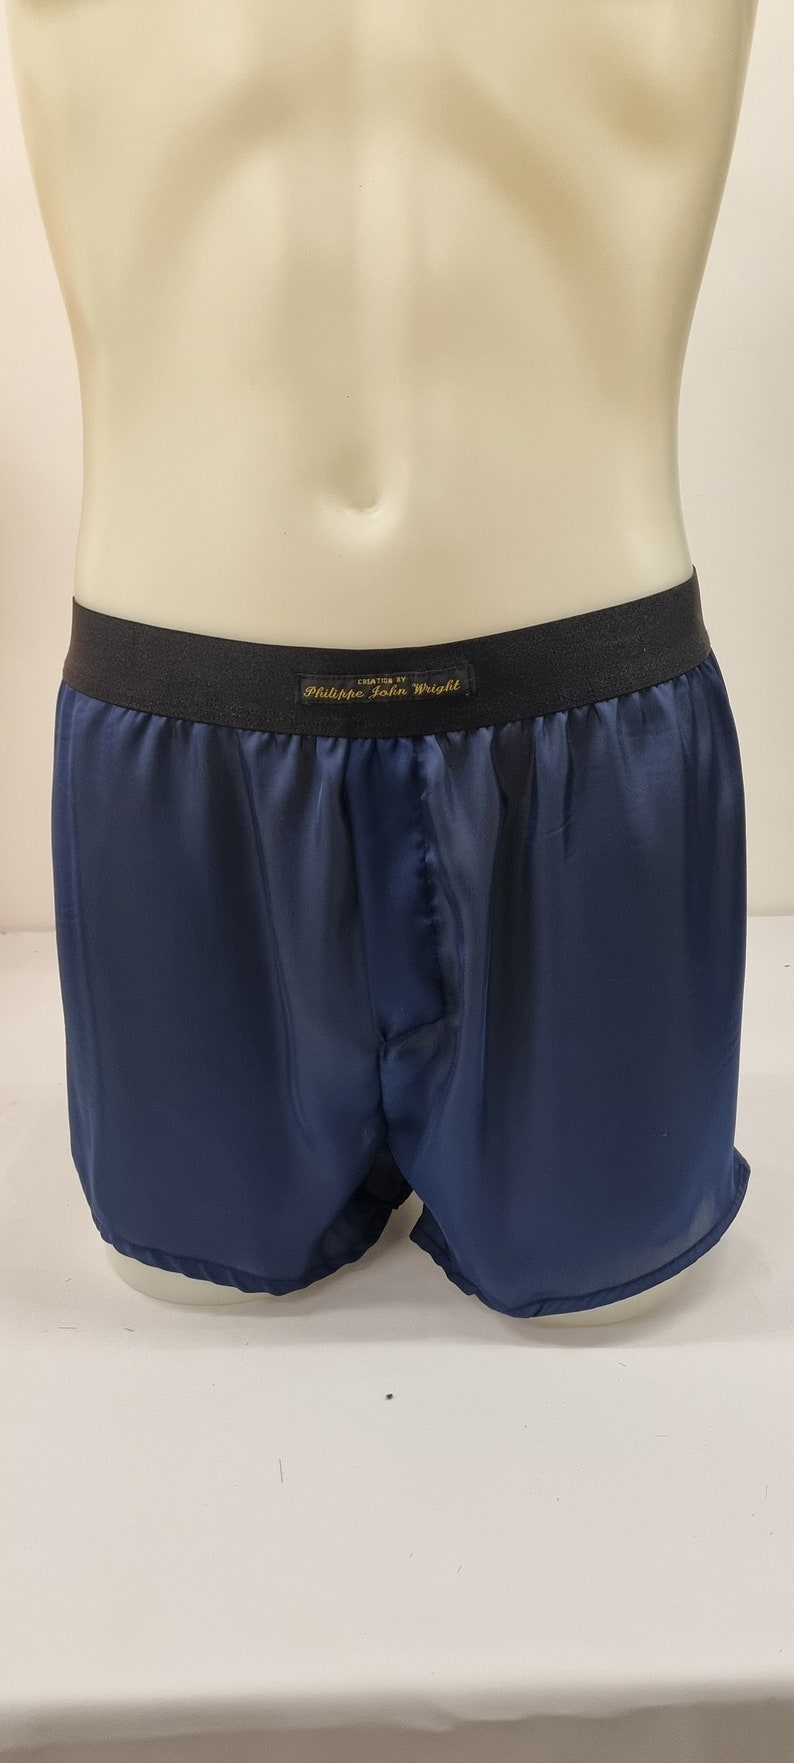 See through Navy blue silky satin sheer boxer shorts for men made in France image 1